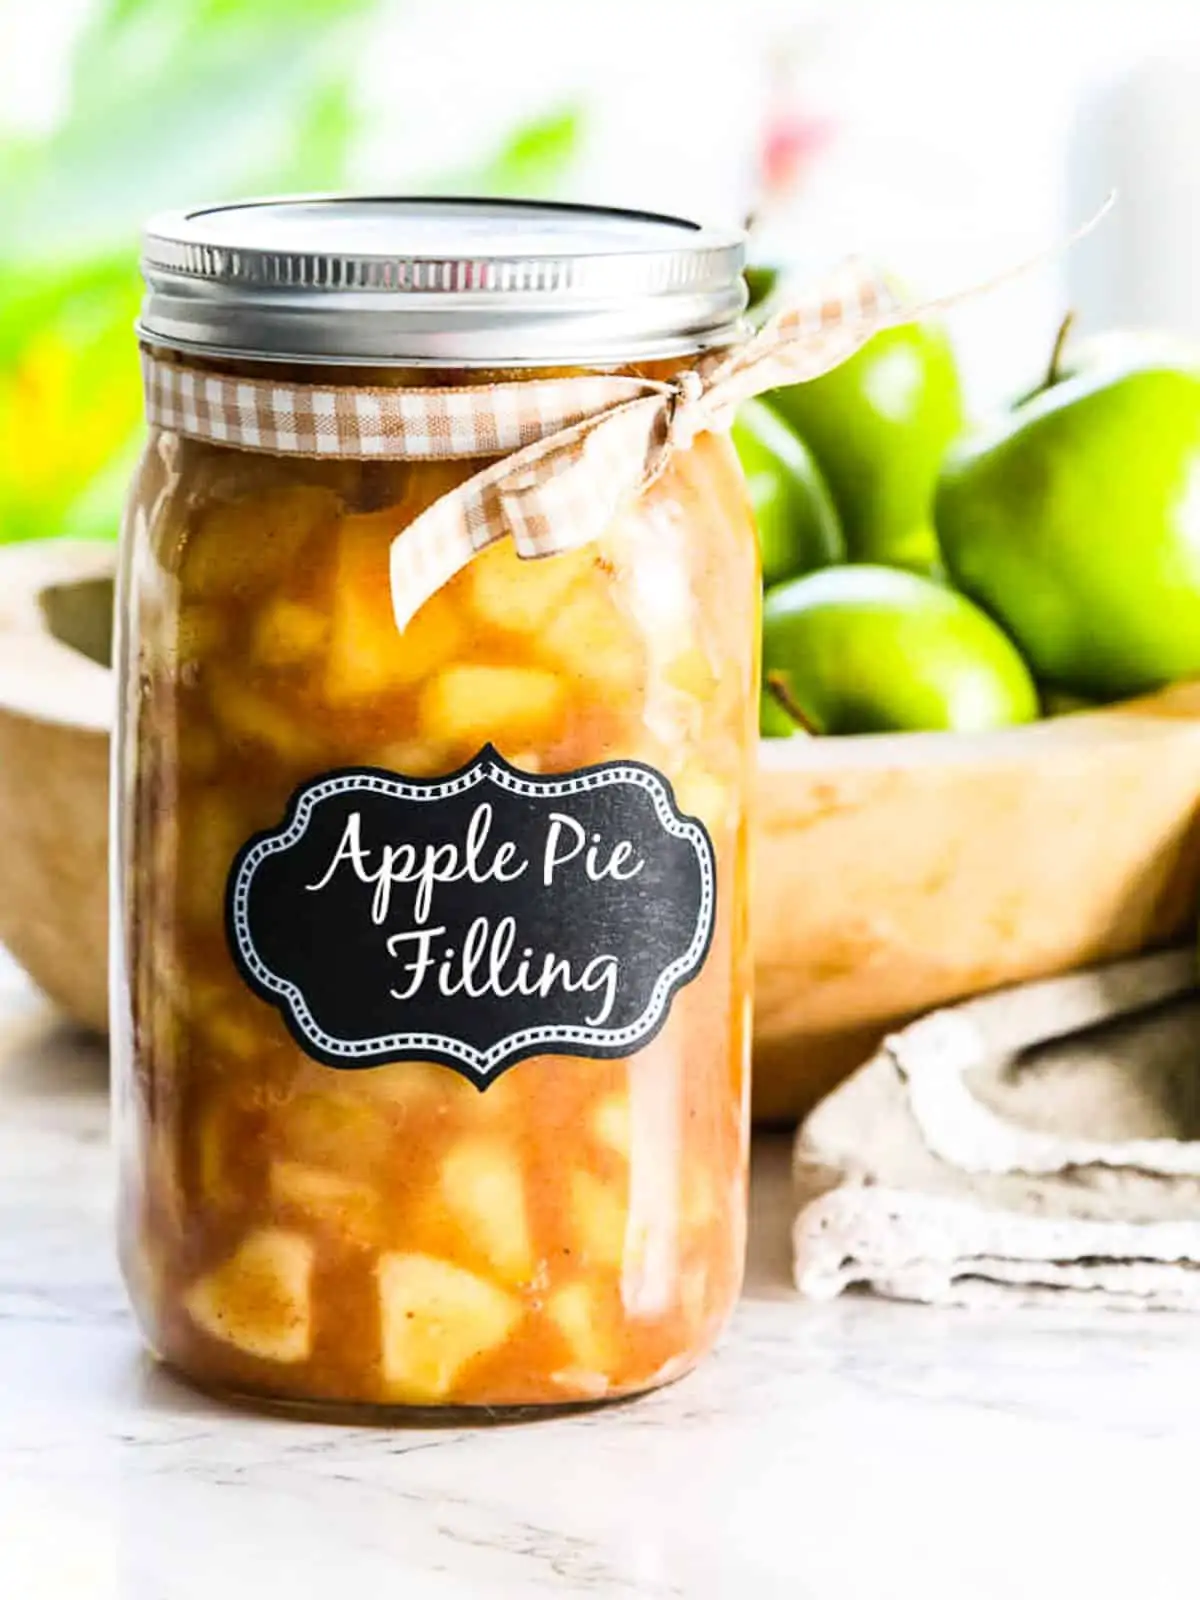 A large glass jar filled with apple pie filling and wood bowl of green apples.